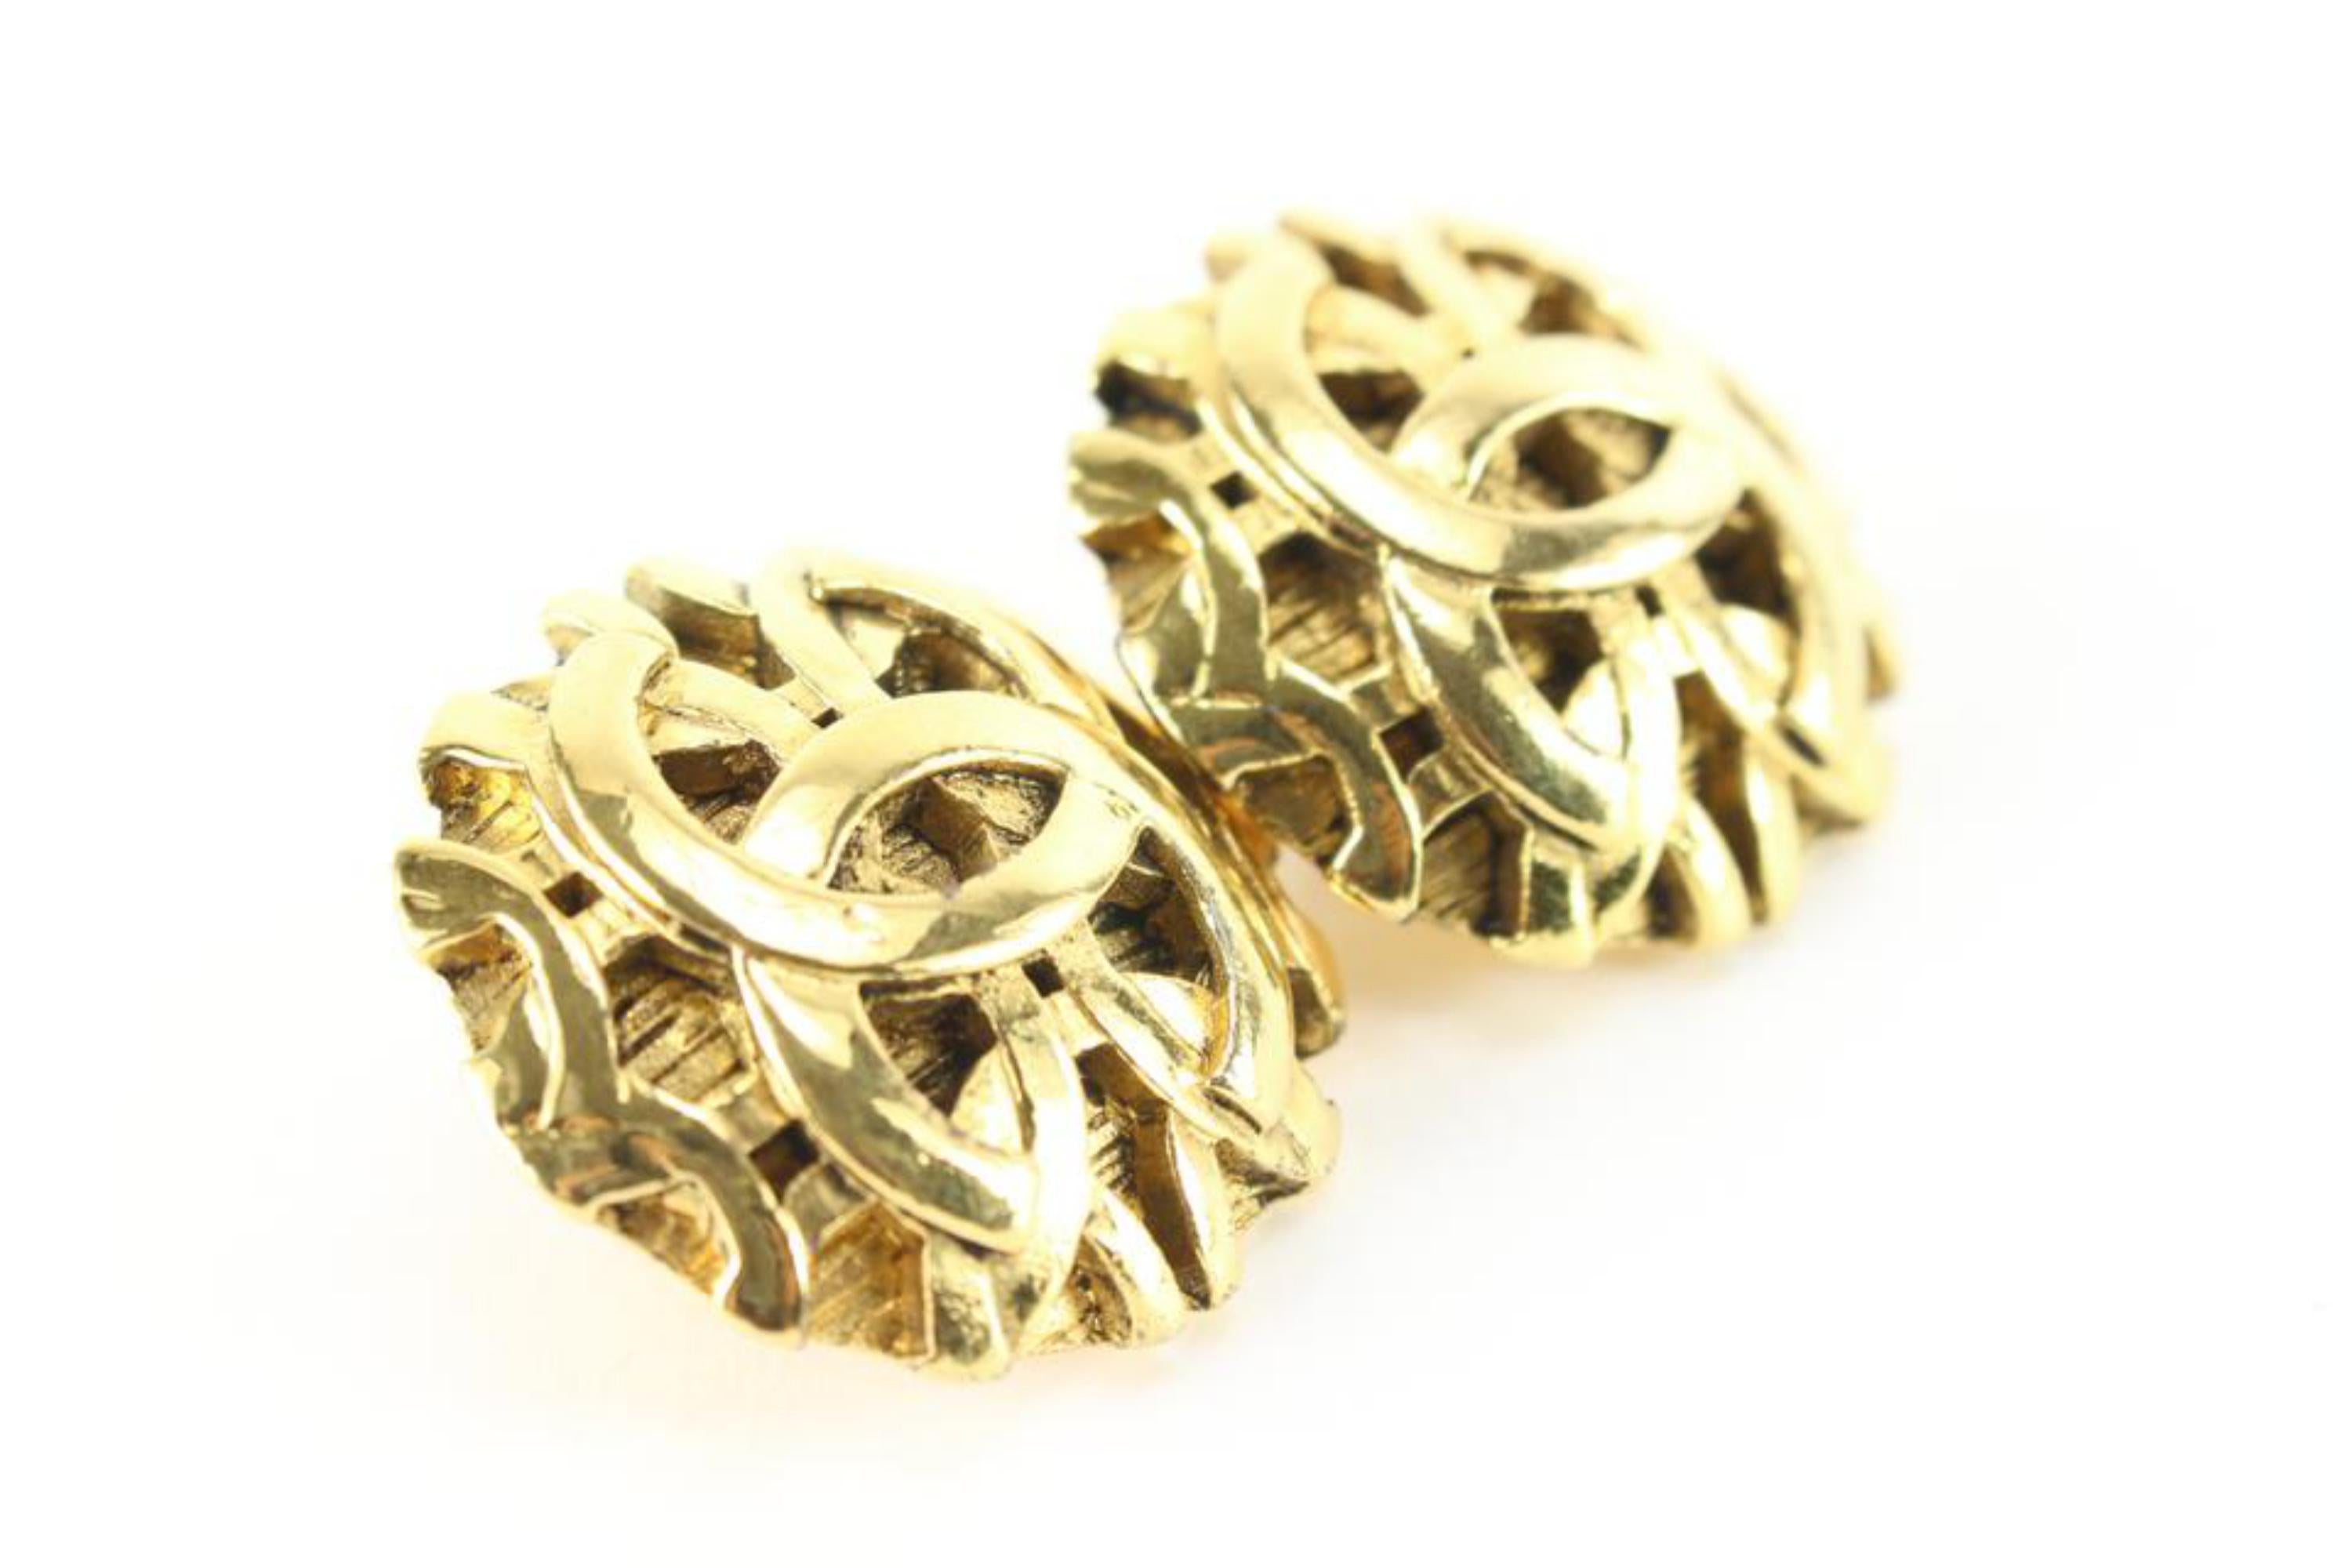 Chanel 24k Gold Plated 25 Collection Jumbo CC Logo Earrings 60ch825s